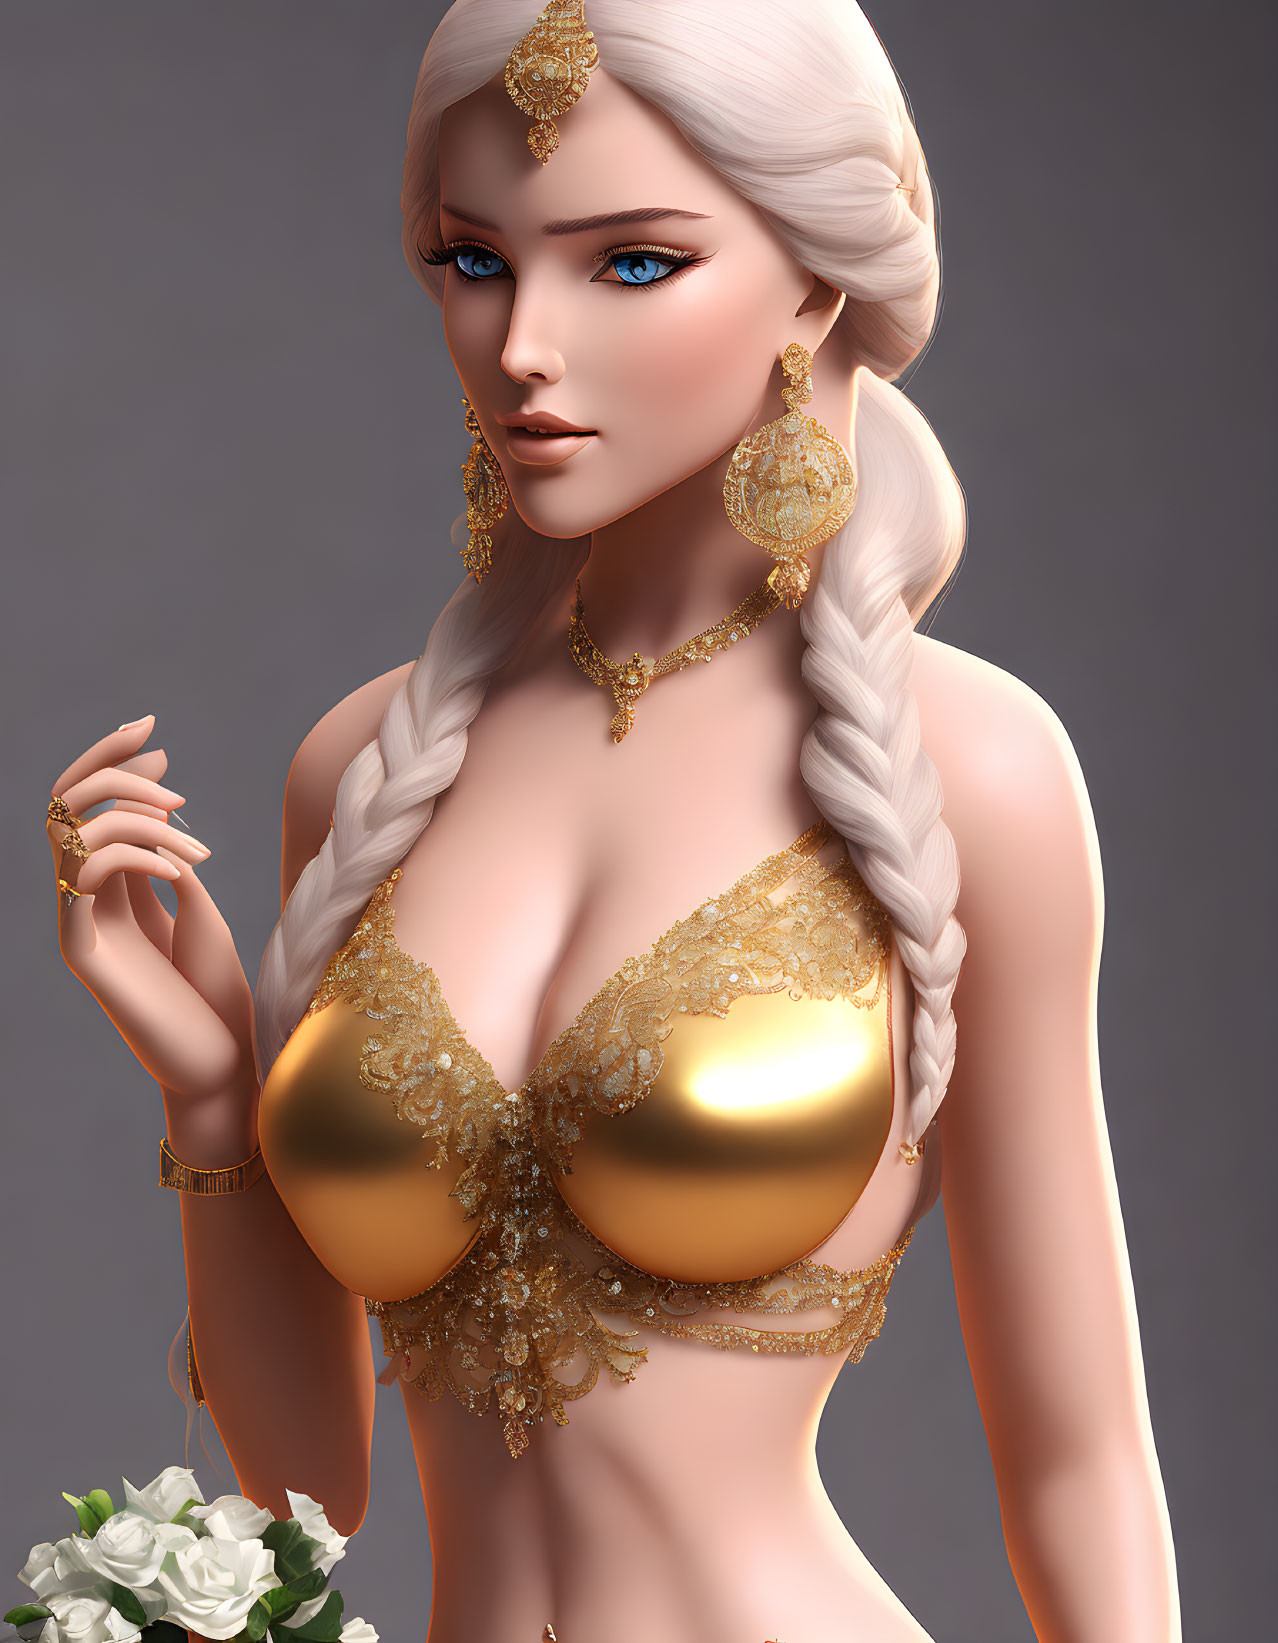 Pale-skinned woman with platinum blonde braid in gold attire against grey background